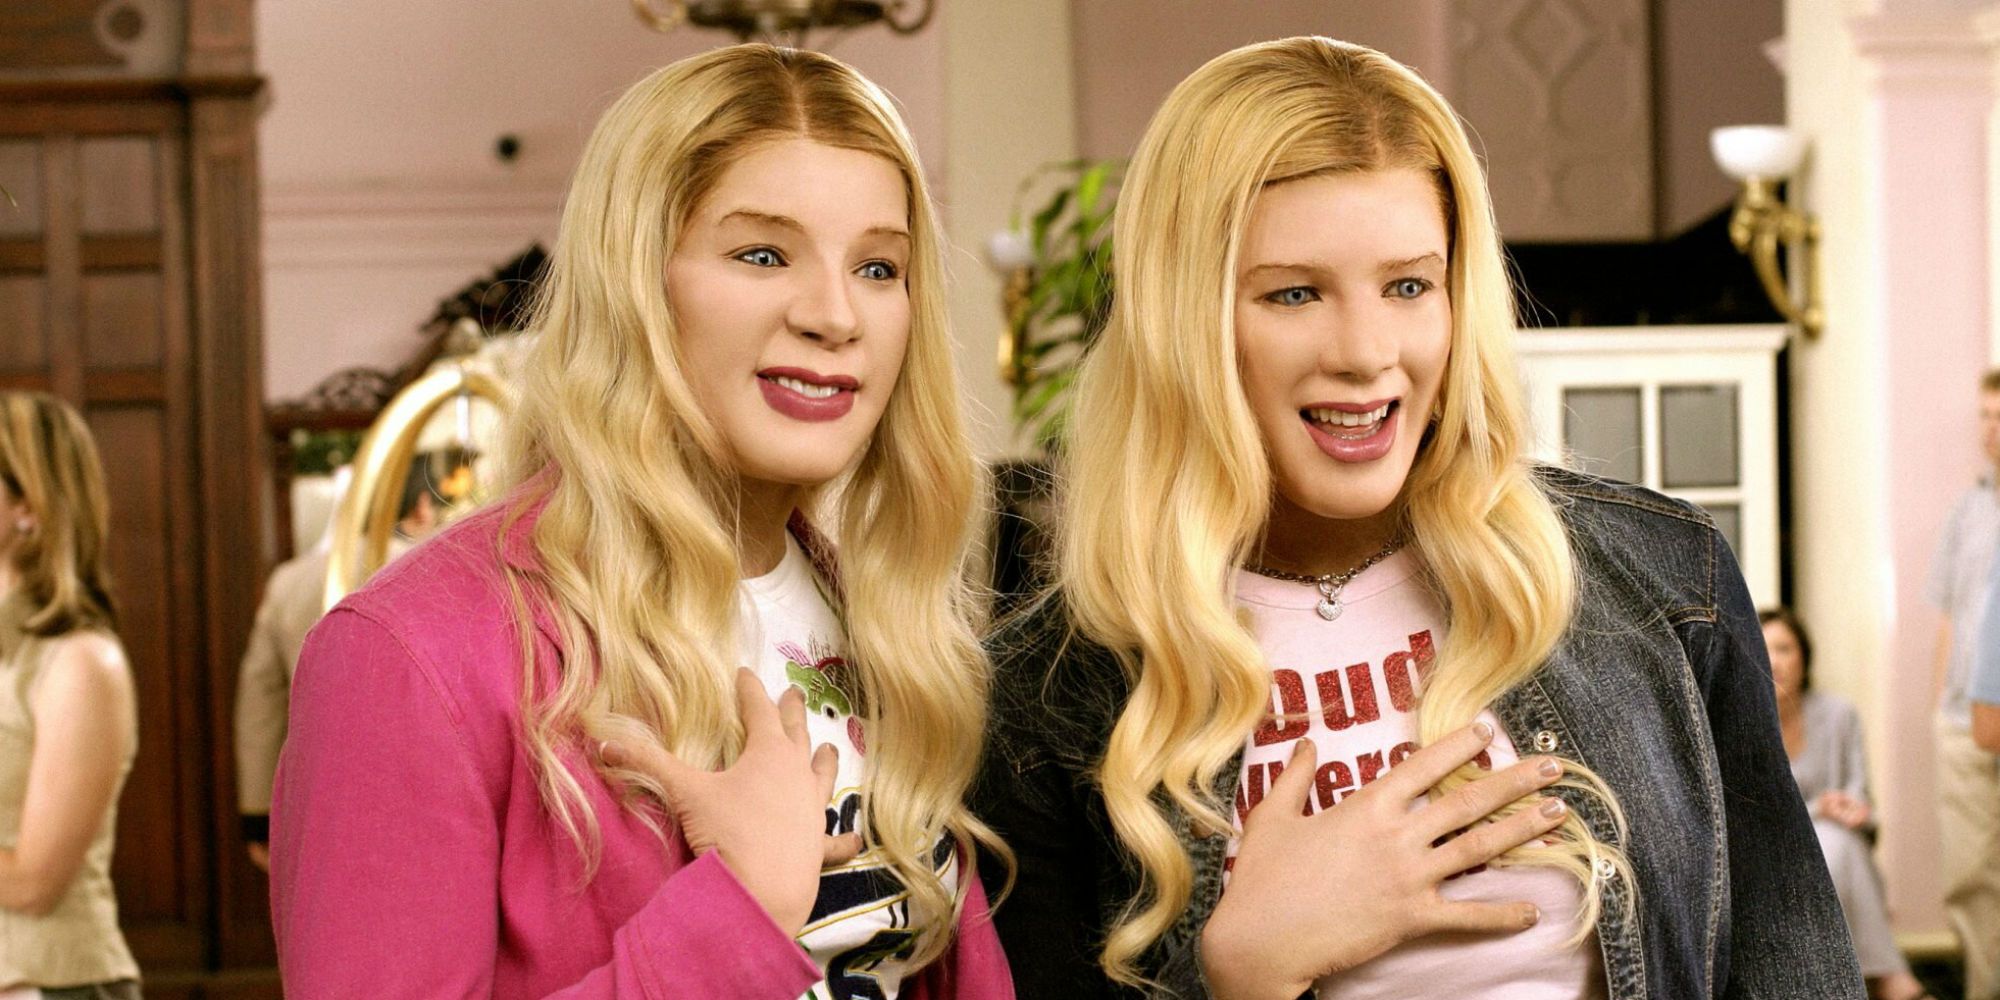 Is White Chicks On Netflix Hulu Or Prime Where To Watch Online